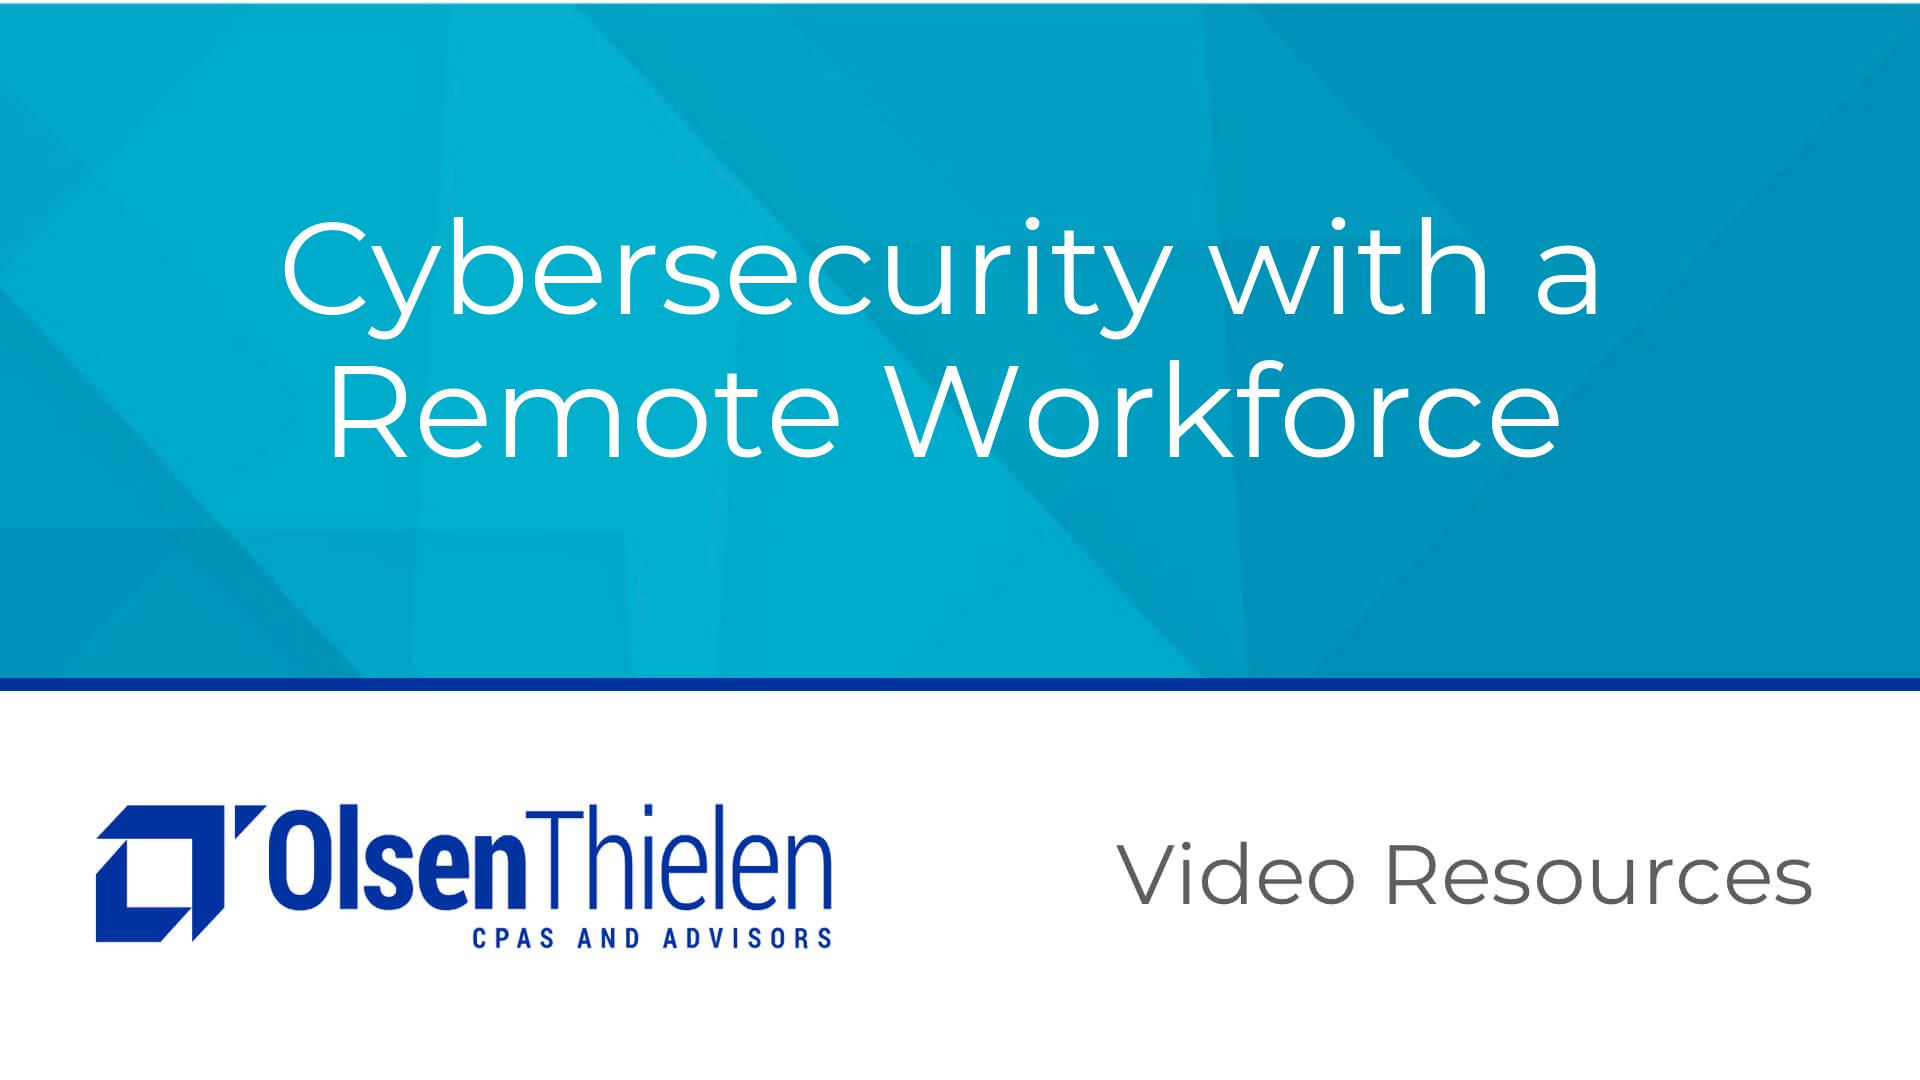 Cybersecurity with a Remote Workforce